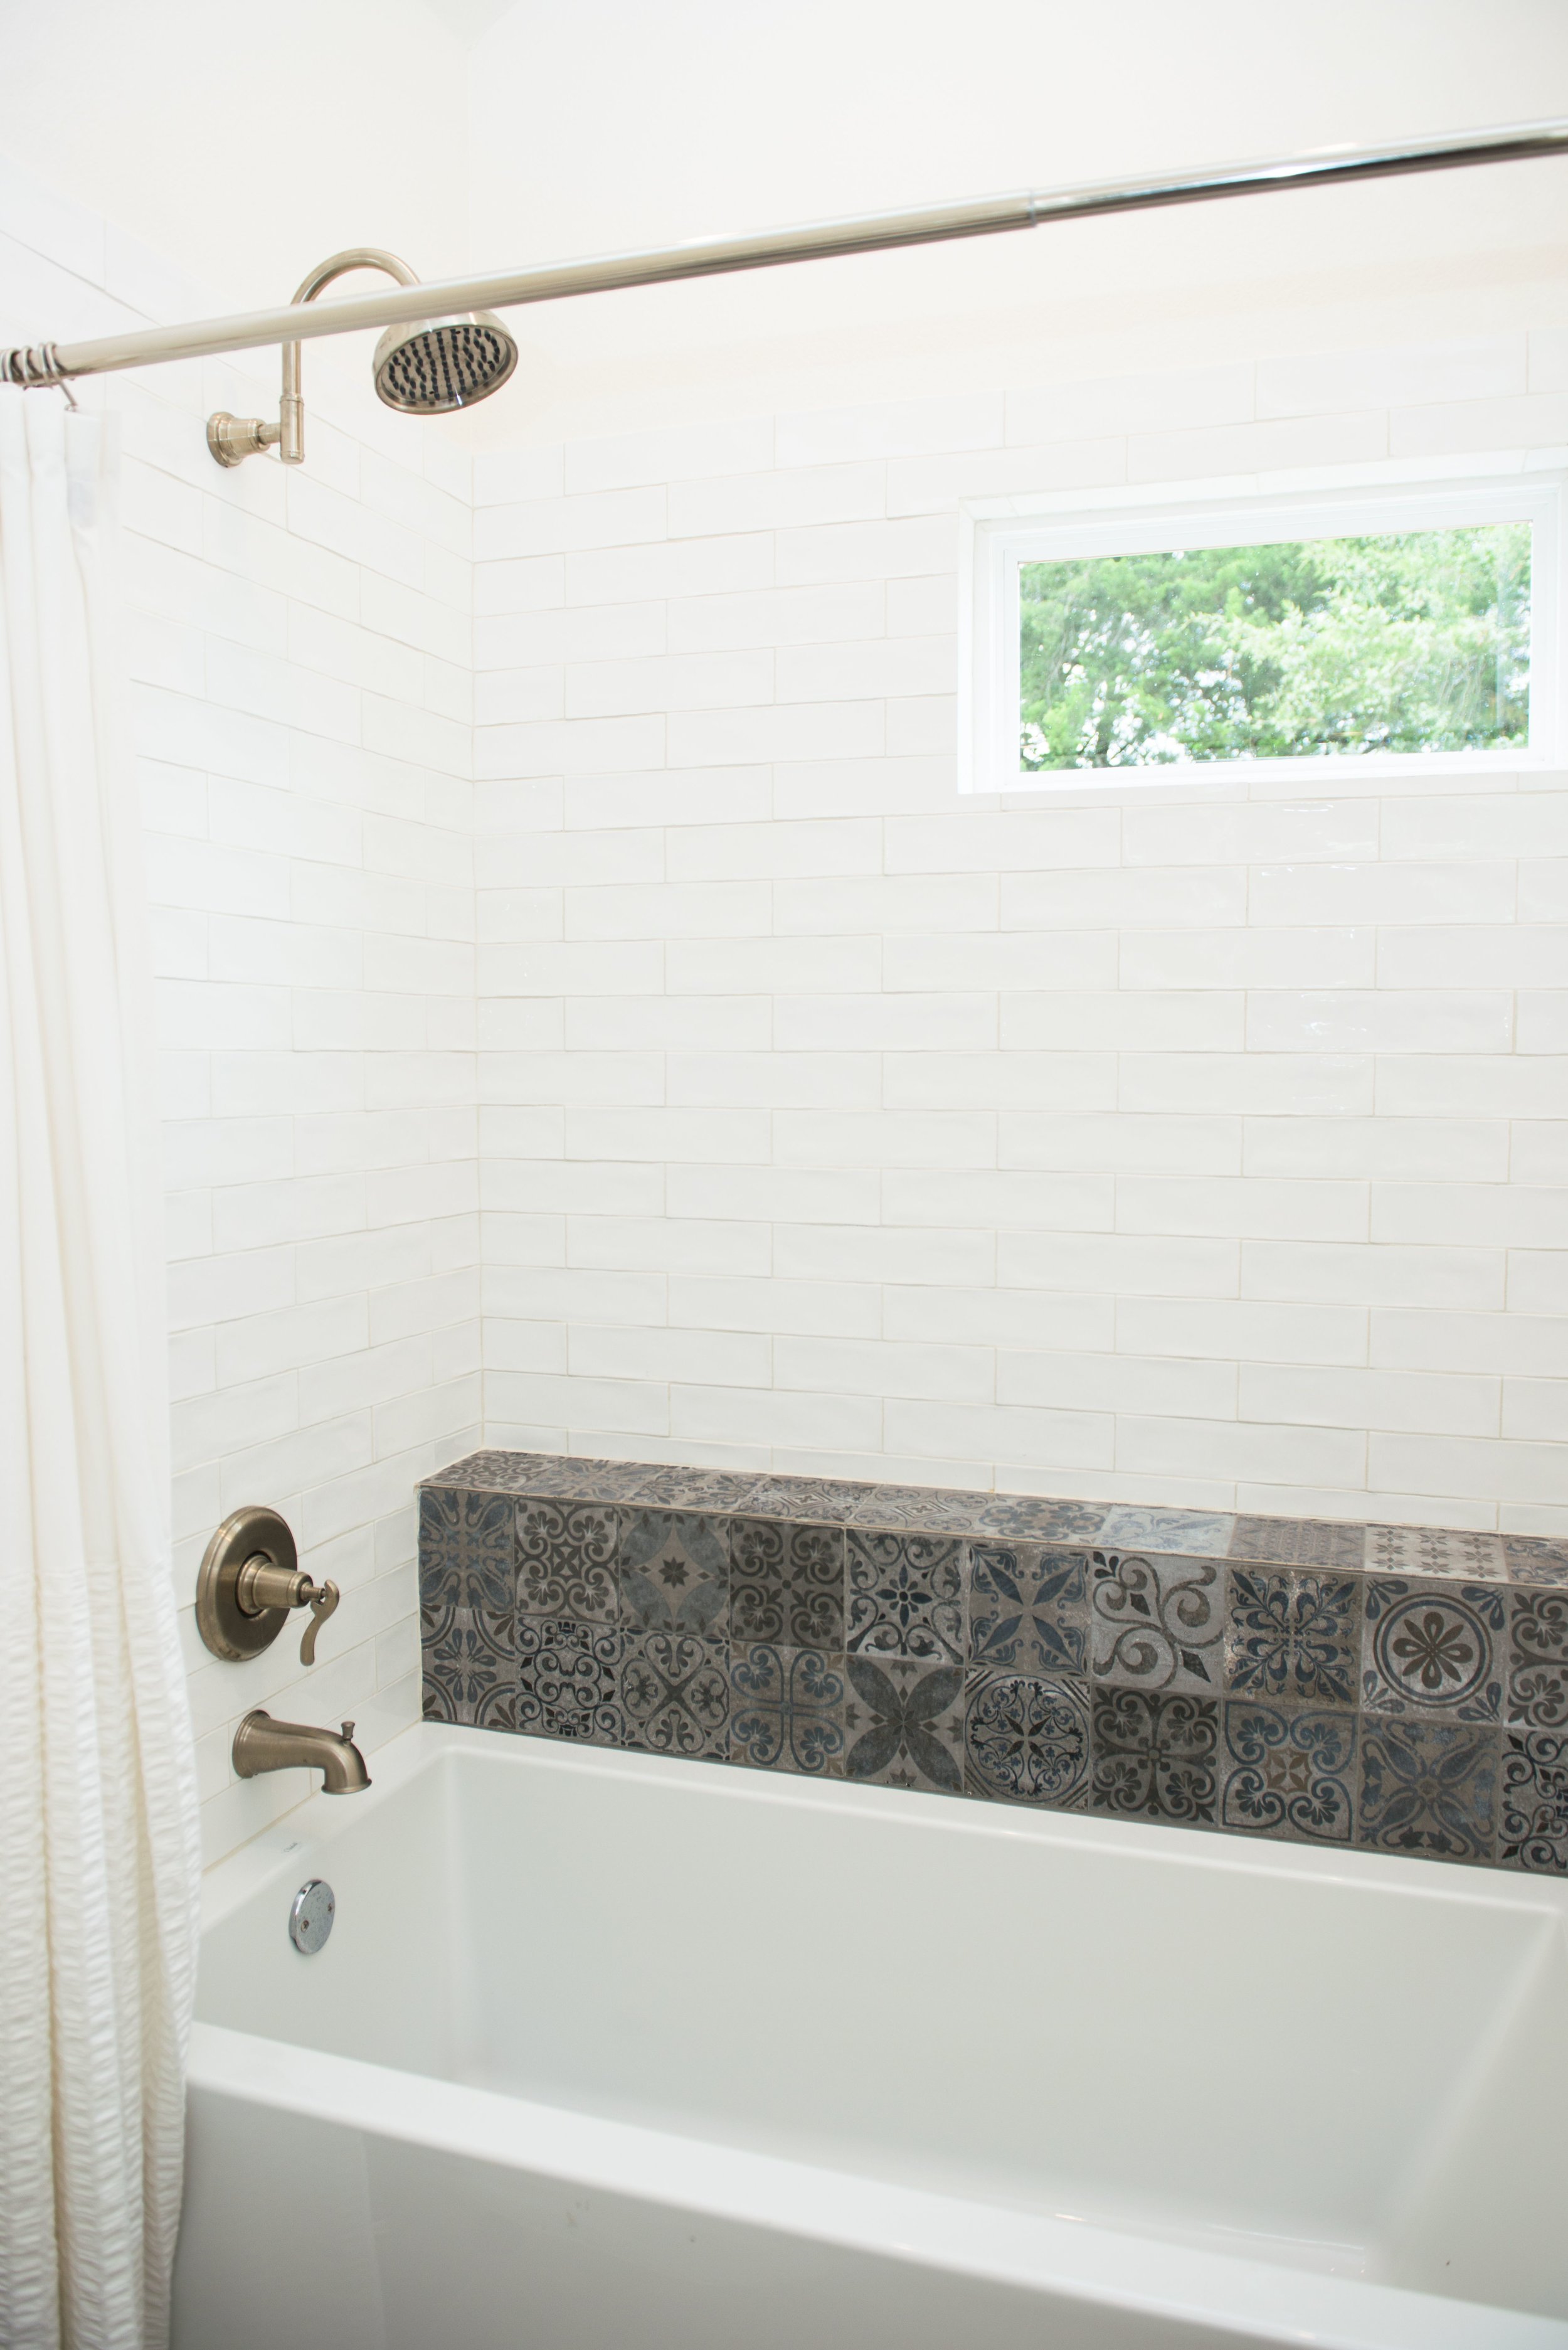   The Boho guest bedroom bath features a soaking tub and shower.  